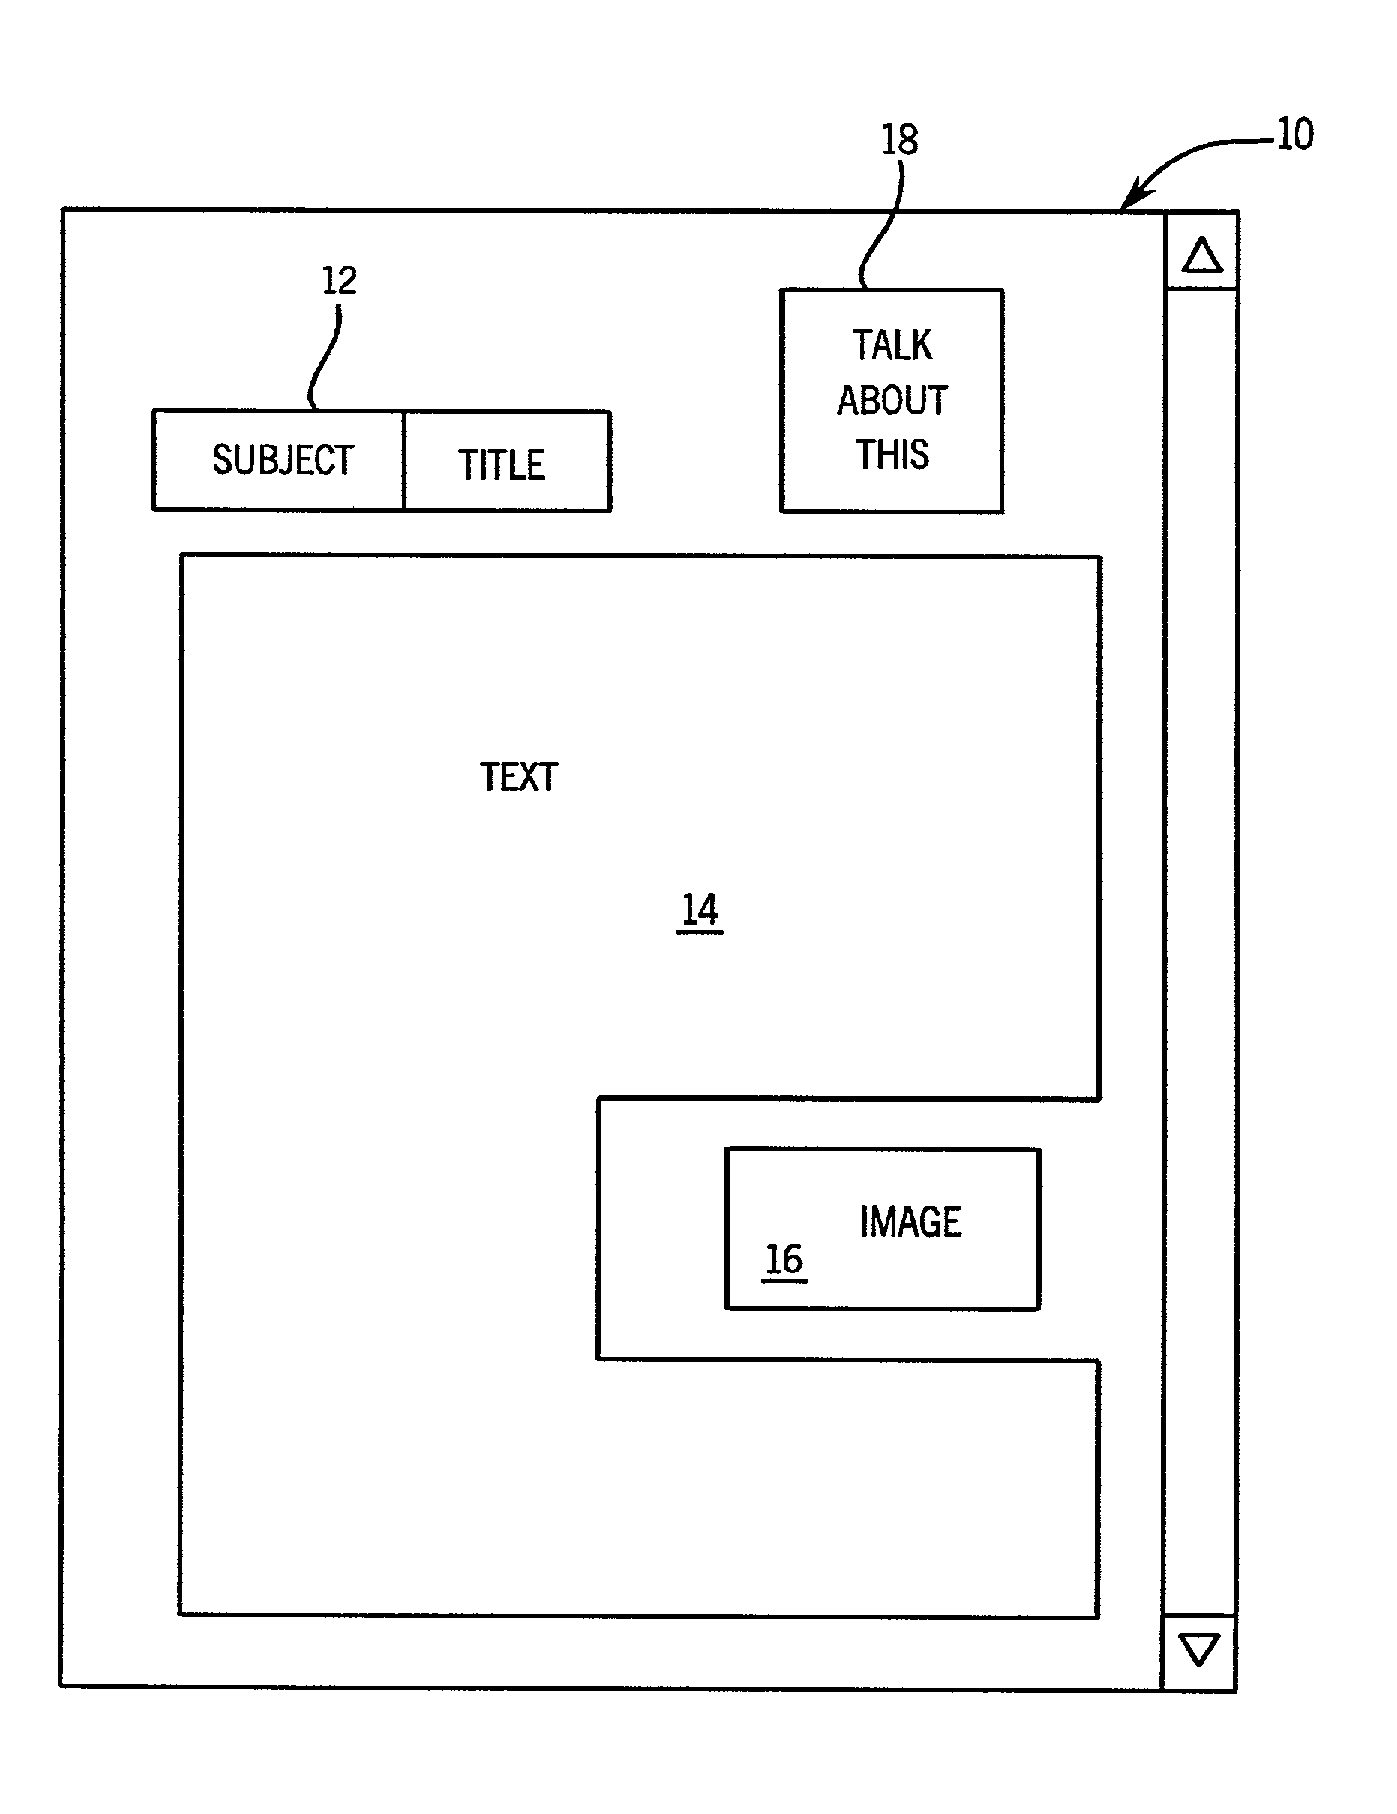 Method and apparatus of cross-pollinating a post to computerized bulletin boards